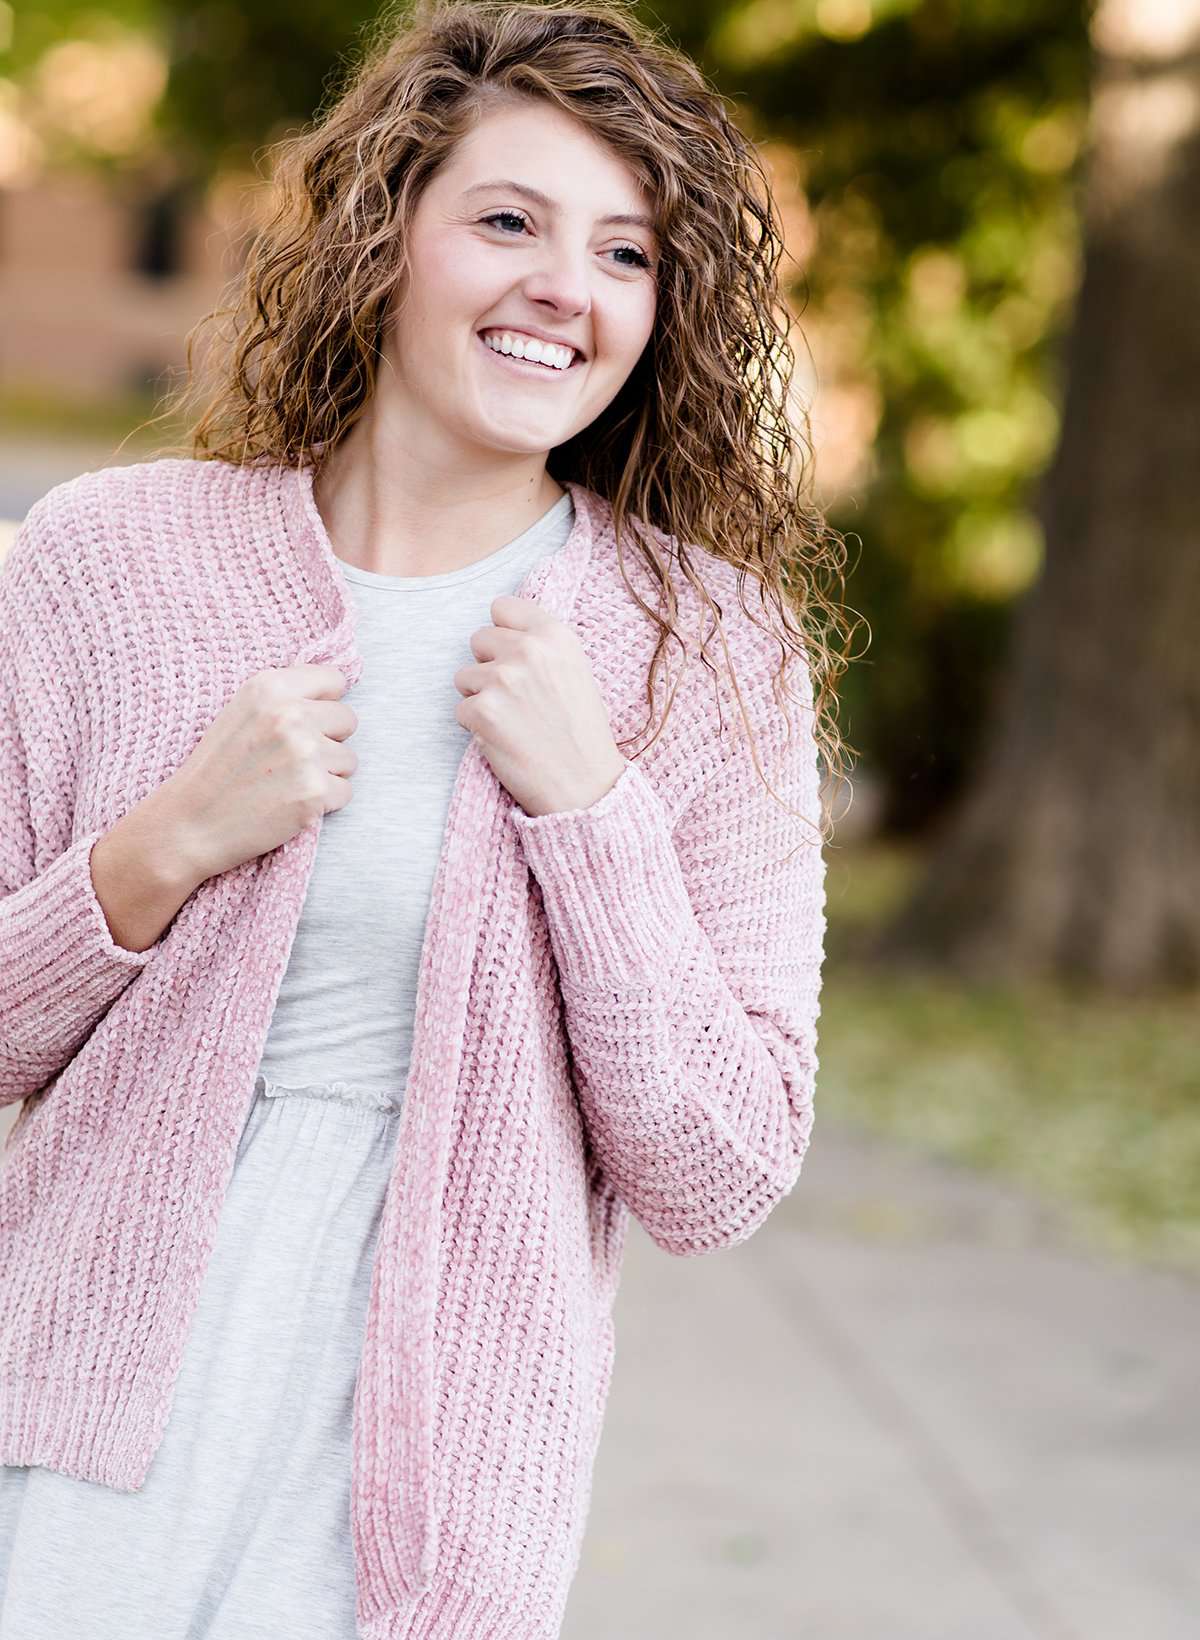 Woman wearing a pink shrug chenille sweater with open front and extra length in the back.